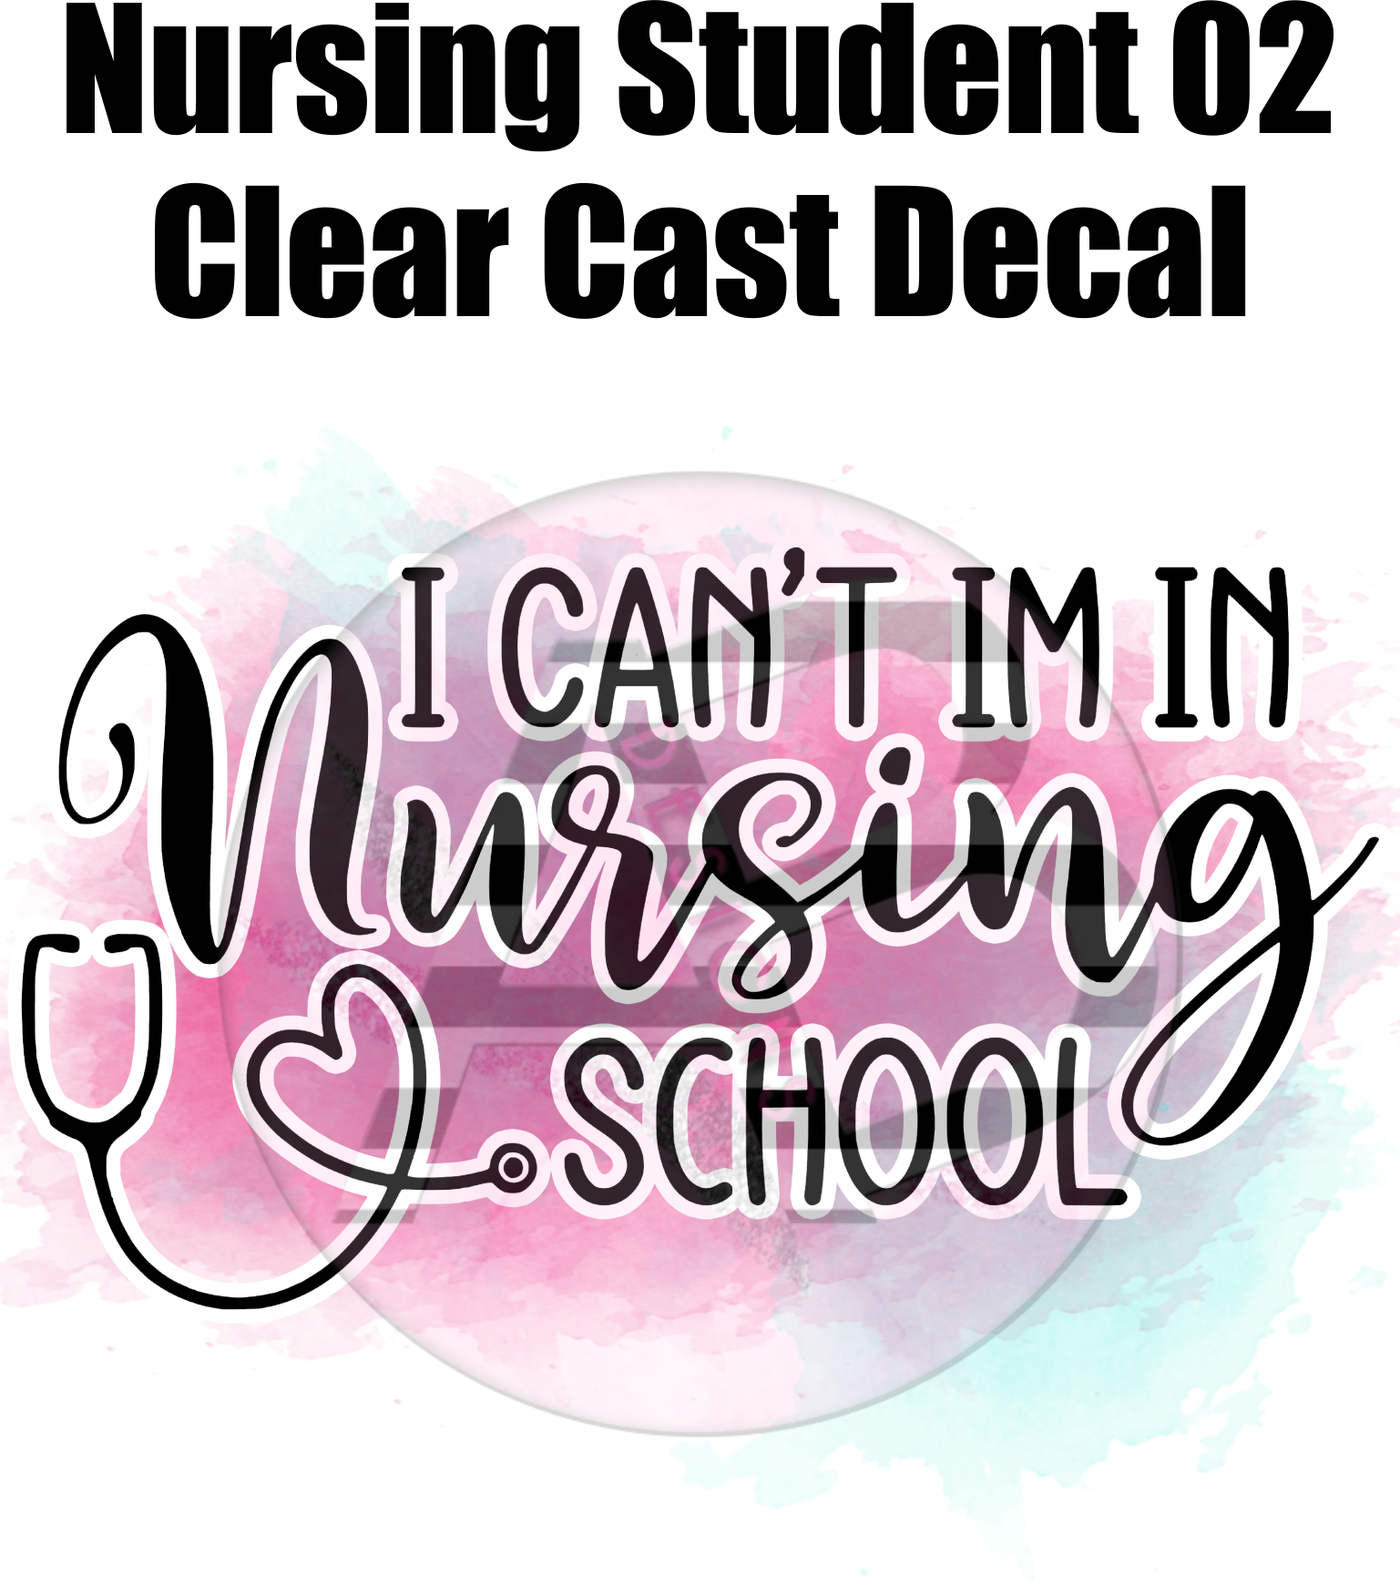 Nursing Student 02 - Clear Cast Decal